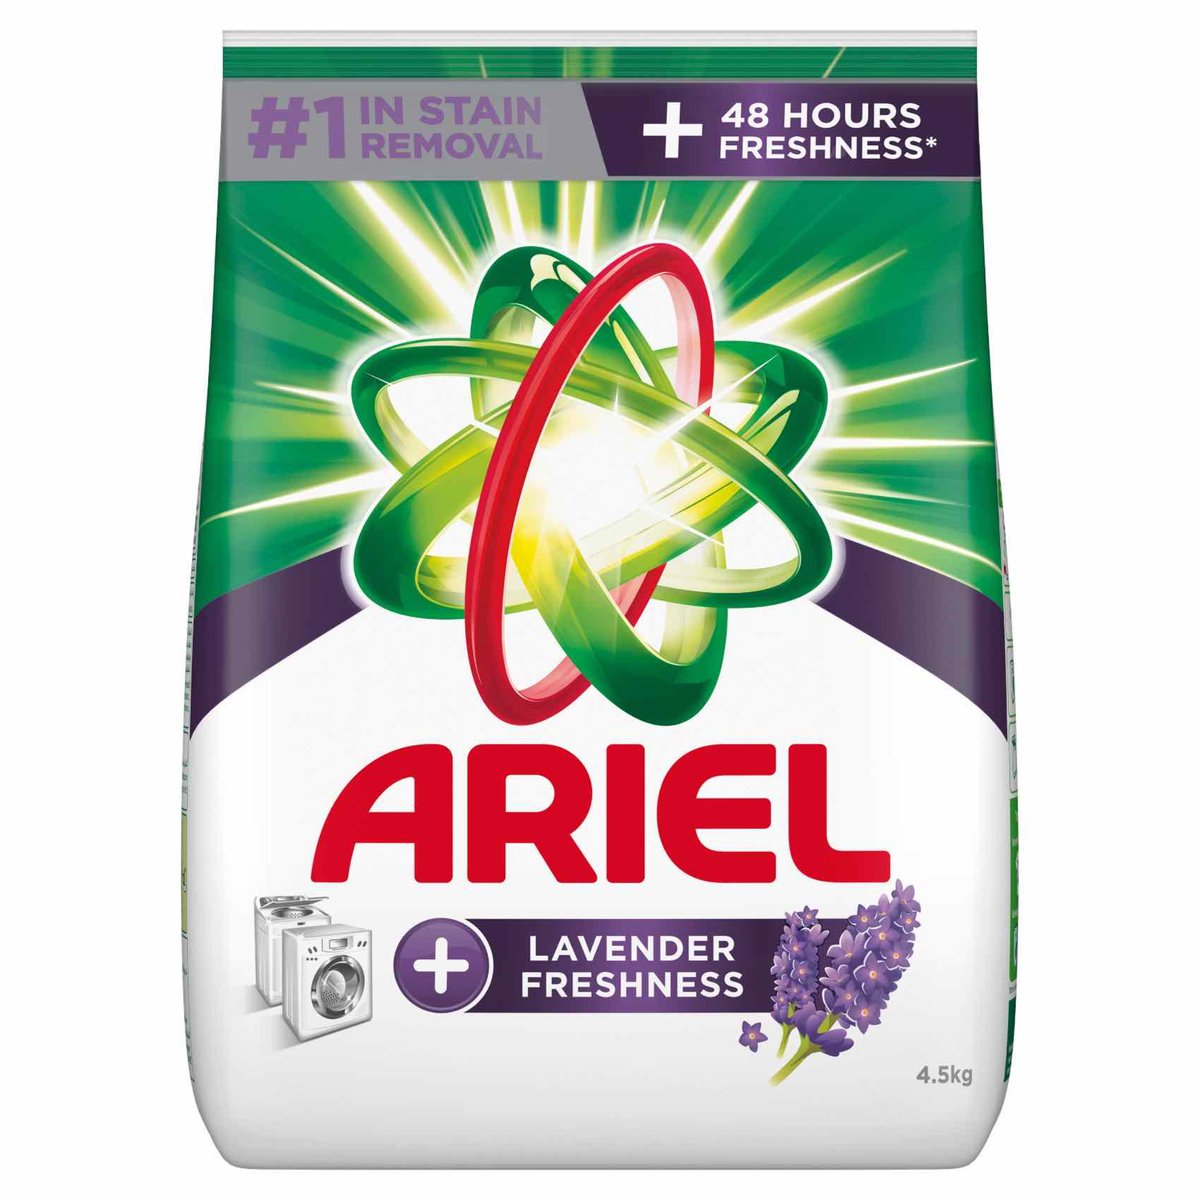 Buy Ariel Automatic Lavender Laundry Detergent Powder, Number 1 in Stain Removal with 48 Hours of Freshness, 4.5 kg Online at Best Price | Front load washing powders | Lulu UAE in Kuwait